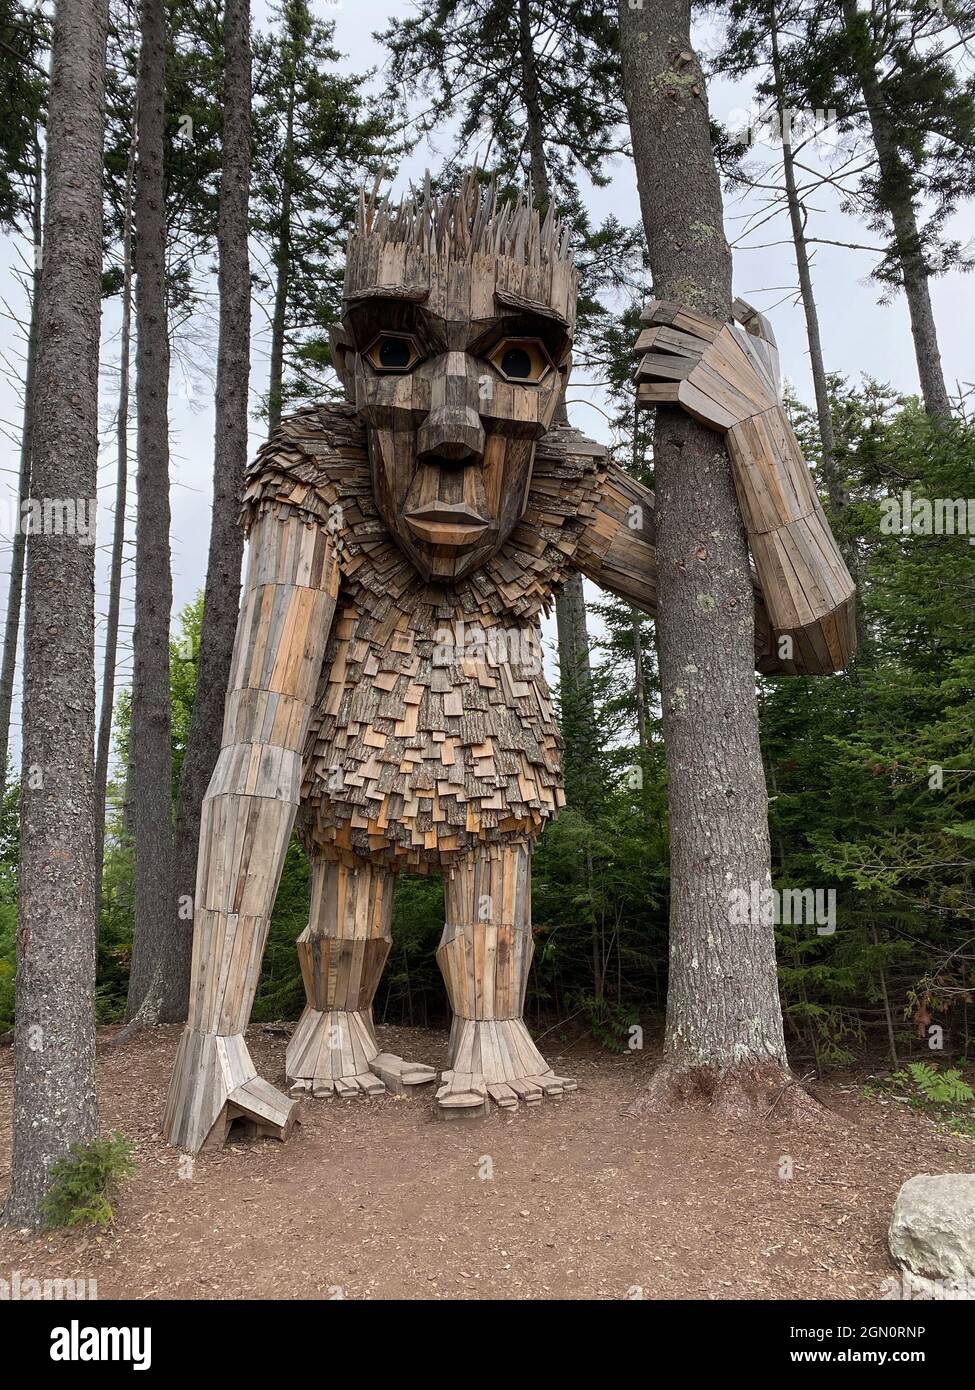 Roskva is one of the five trolls in the Coastal Botanical Gardens in Boothbay, Maine. She represents the trunk of the tree. The artist is Thomas Dambo, and he makes—all from recycled materials— the head, hands, and feet in his studio in Copenhagen, Denmark. He then ships them to wherever they are going in the world. Once in their “home”, recycled materials are gathered to make the bodies. For the Maine Gardens, about 750 palettes were used. Stock Photo